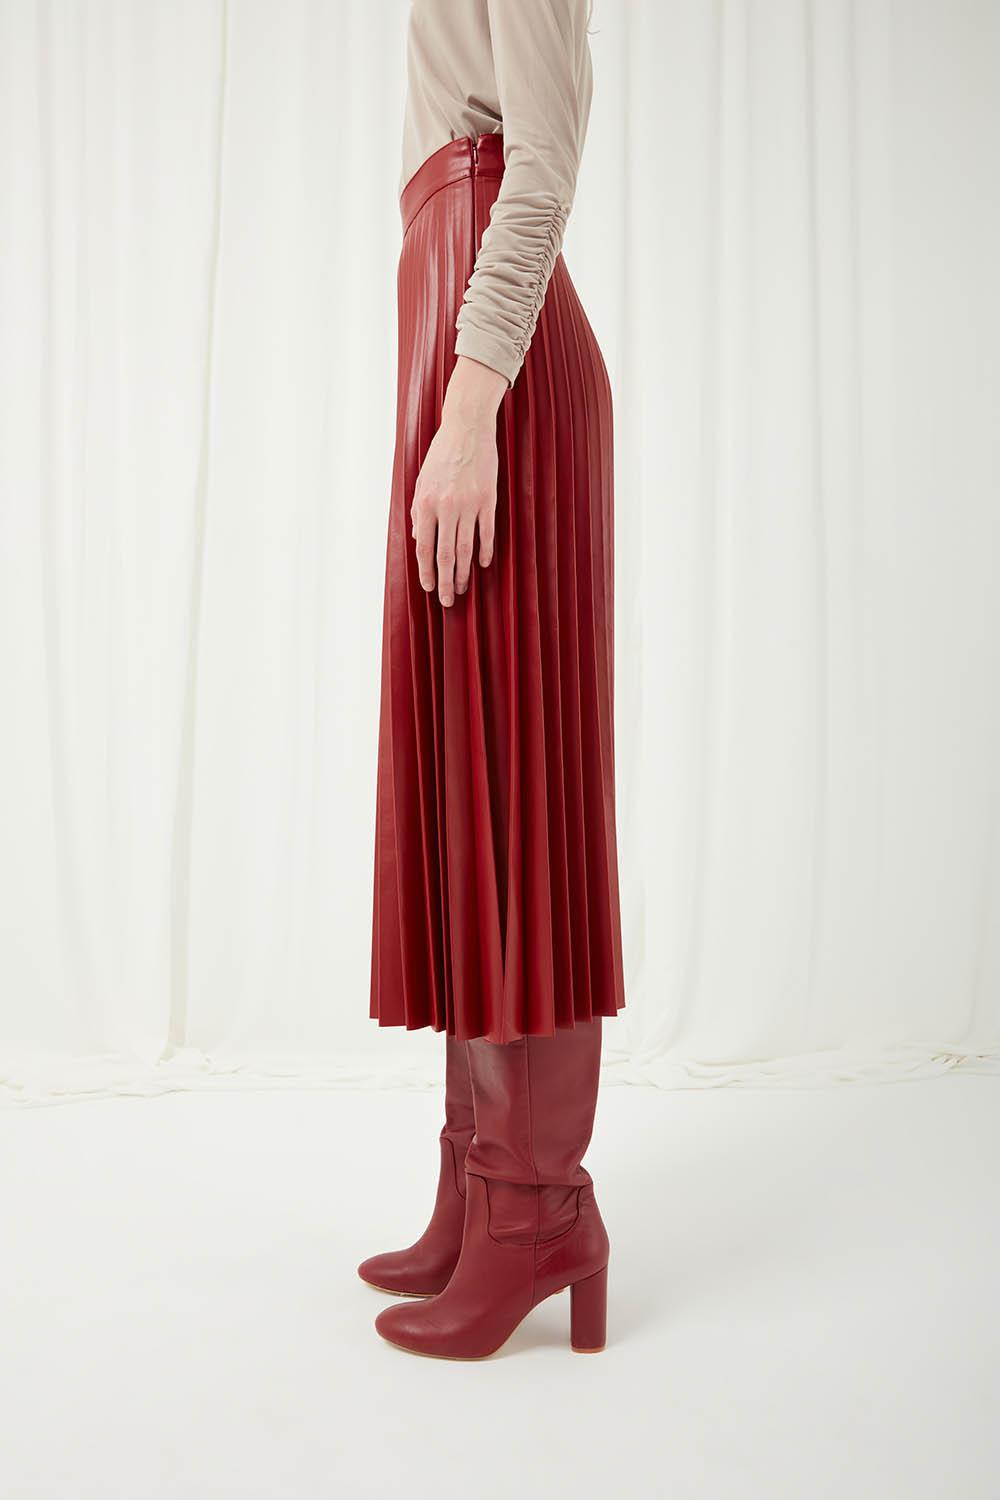 Faux Leather Burgundy Pleated Skirt